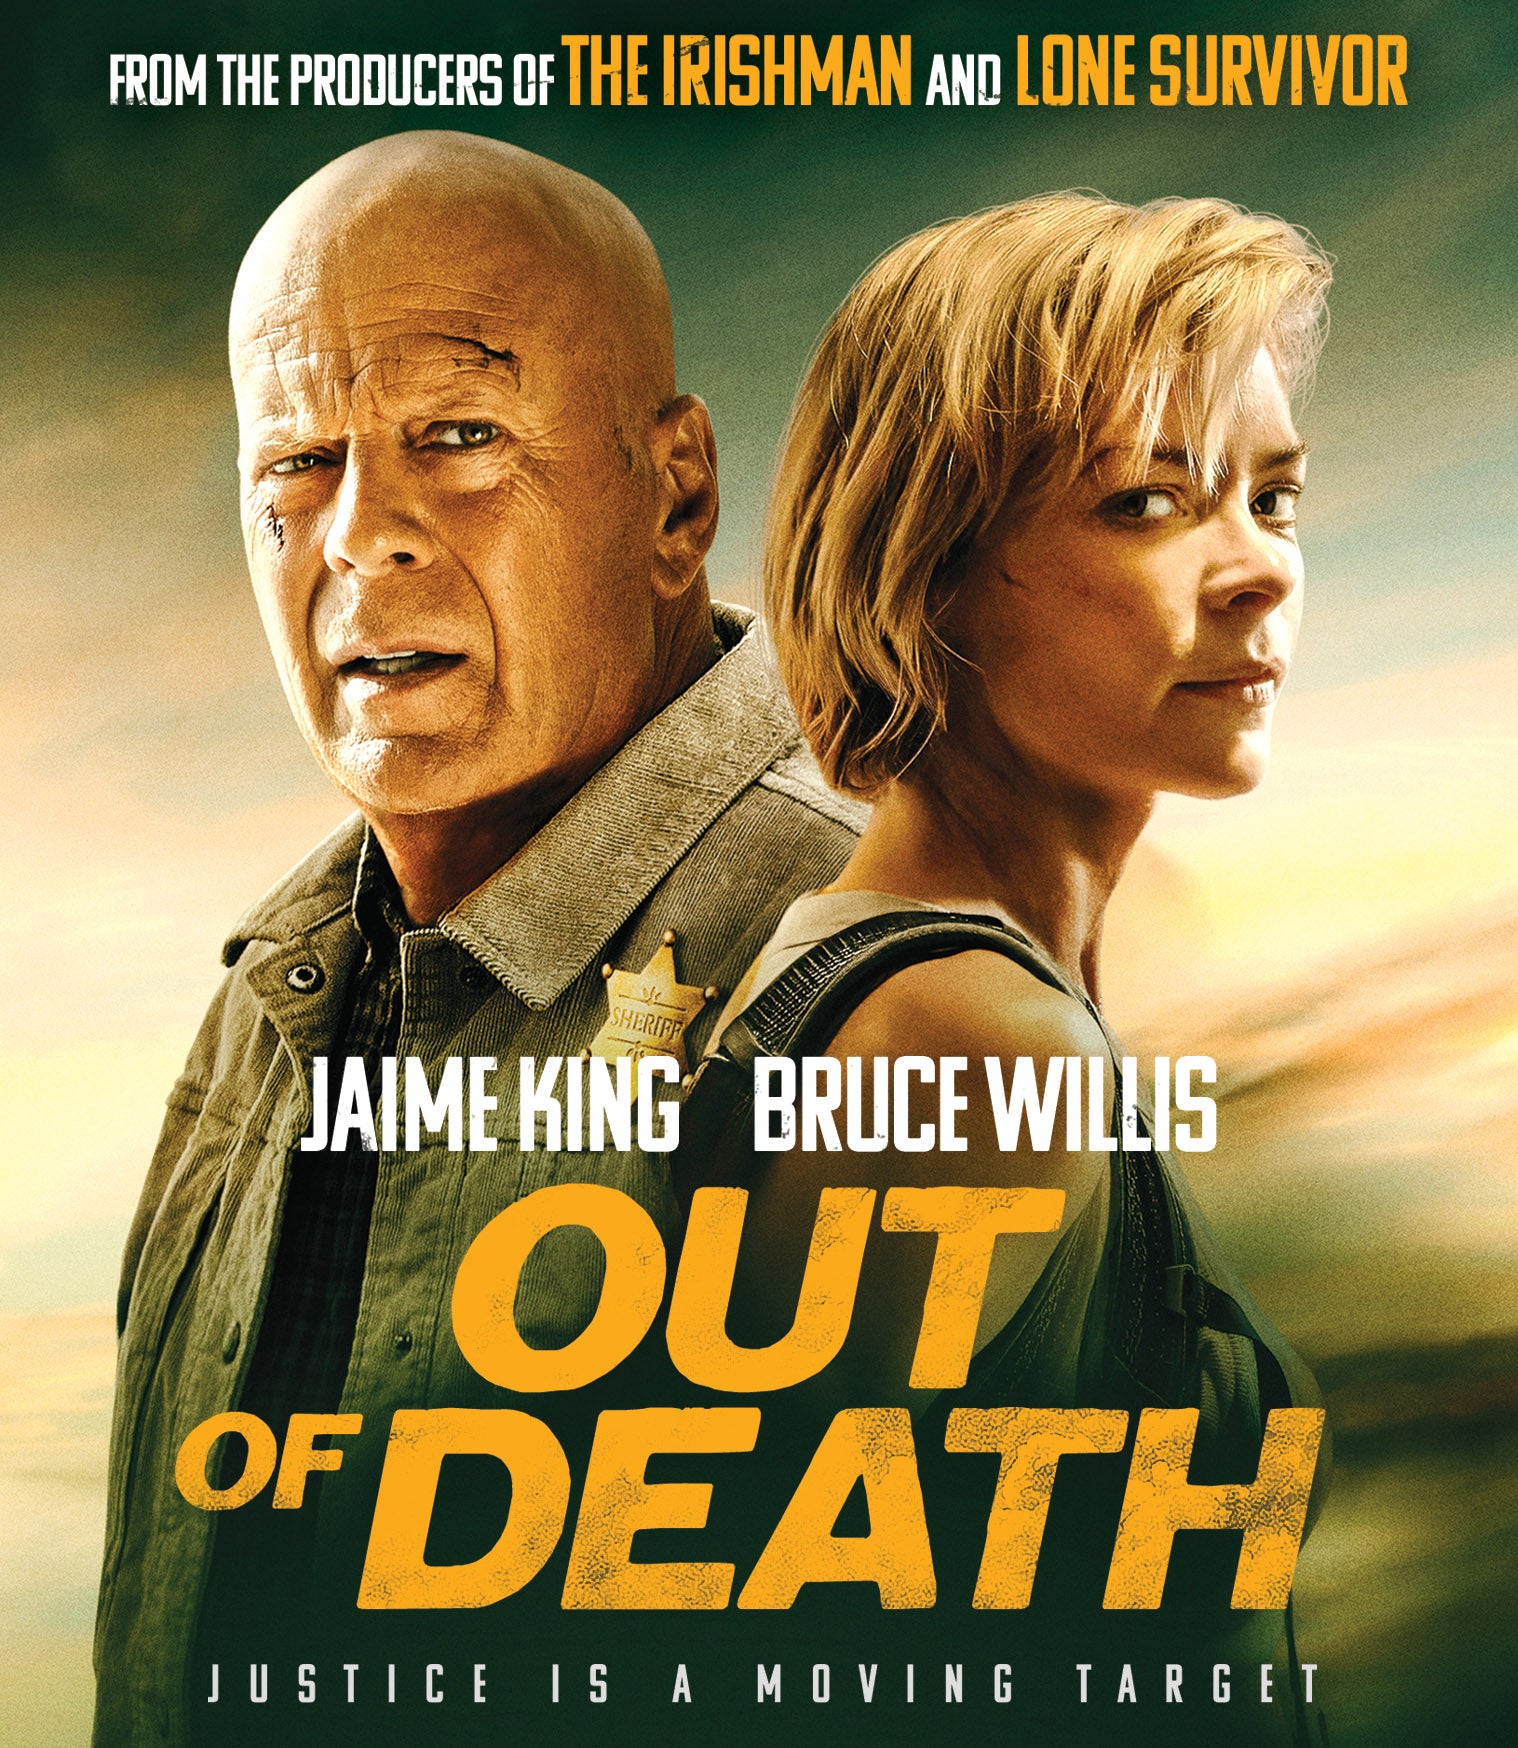 Out of Death [Blu-ray] cover art